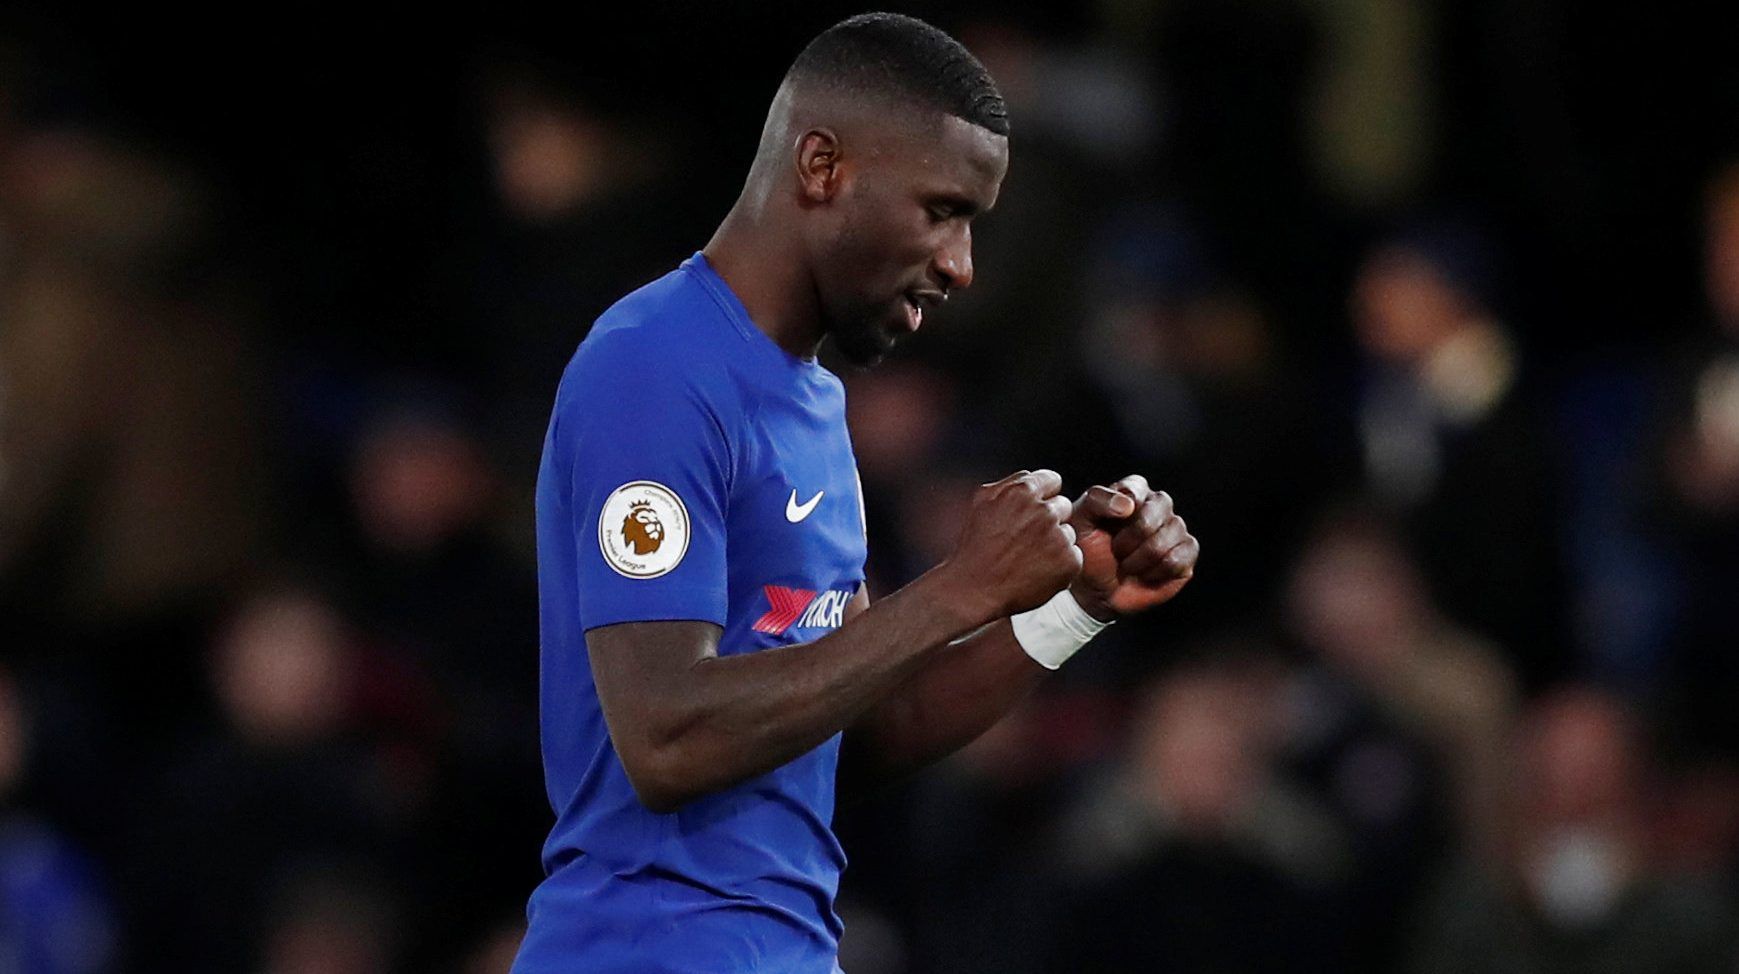 Soccer Football - Premier League - Chelsea vs Swansea City - Stamford Bridge, London, Britain - November 29, 2017   Chelsea's Antonio Rudiger celebrates at the end of the match    Action Images via Reuters/Peter Cziborra    EDITORIAL USE ONLY. No use with unauthorized audio, video, data, fixture lists, club/league logos or 